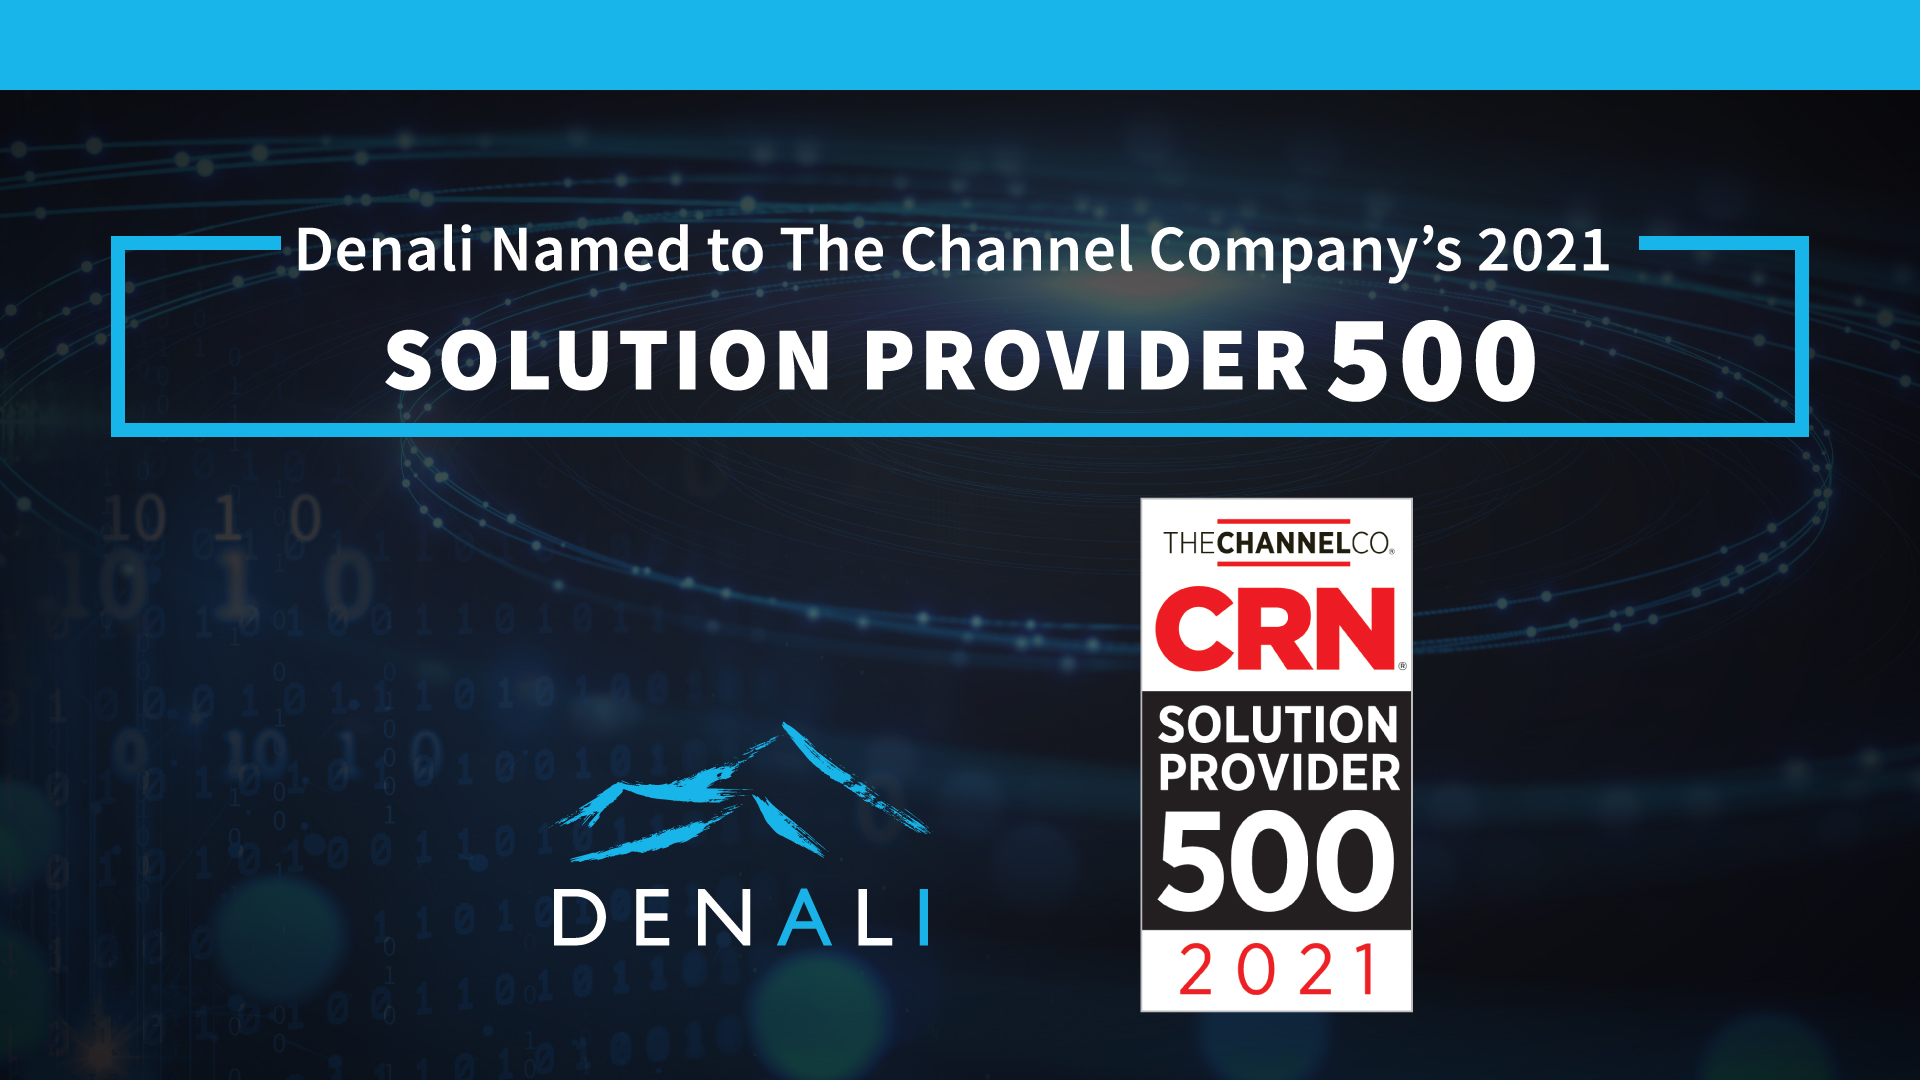 Denali Advanced Integration Featured on CRN’s 2021 Solution Provider 500 List